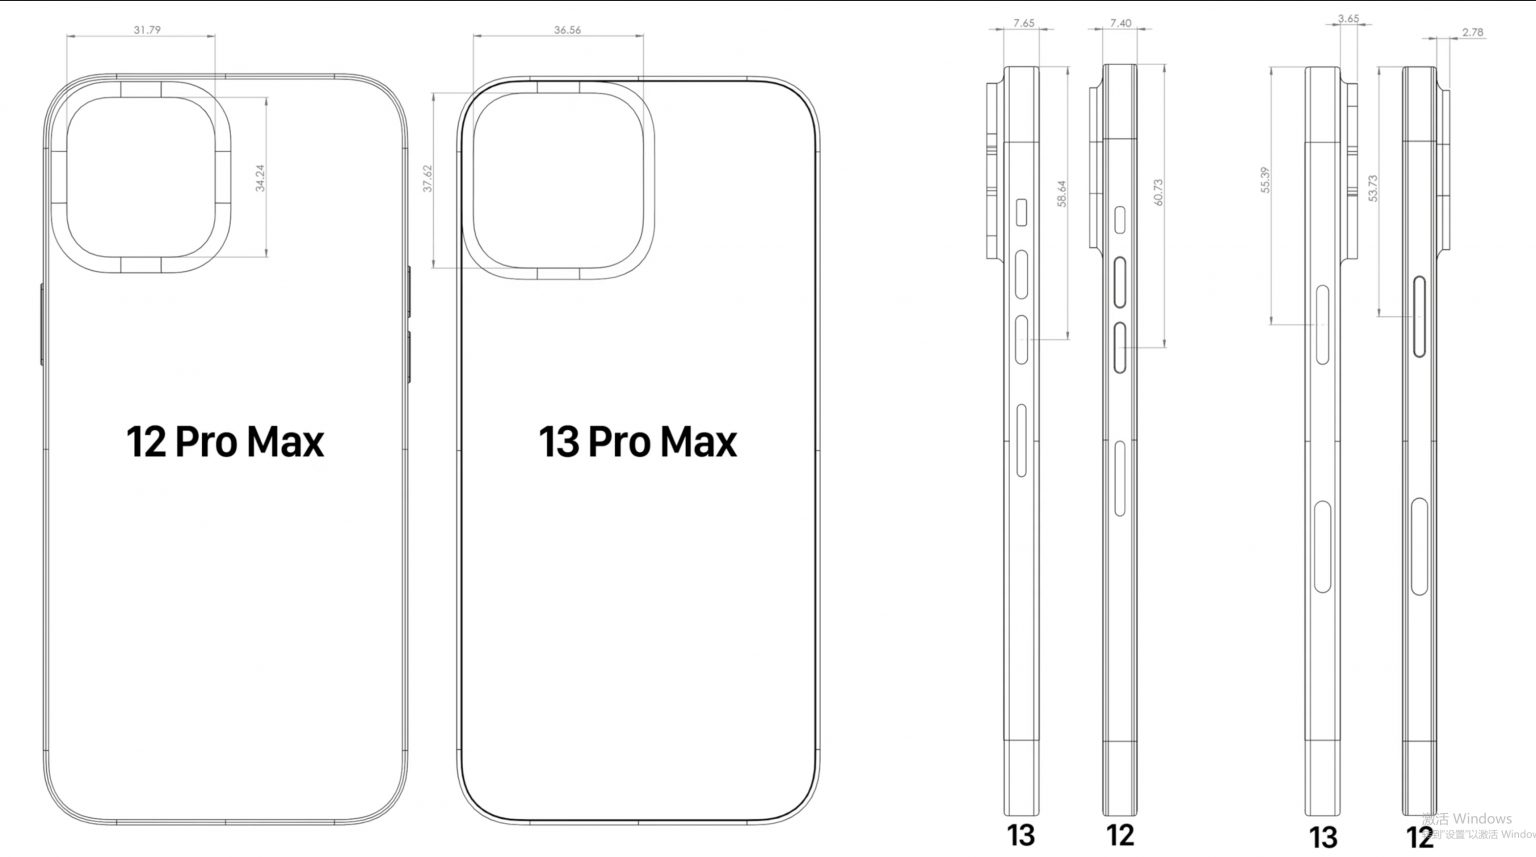 iPhone 13 Pro Max Would Be Thicker And Bigger Than iPhone 12 Pro Max